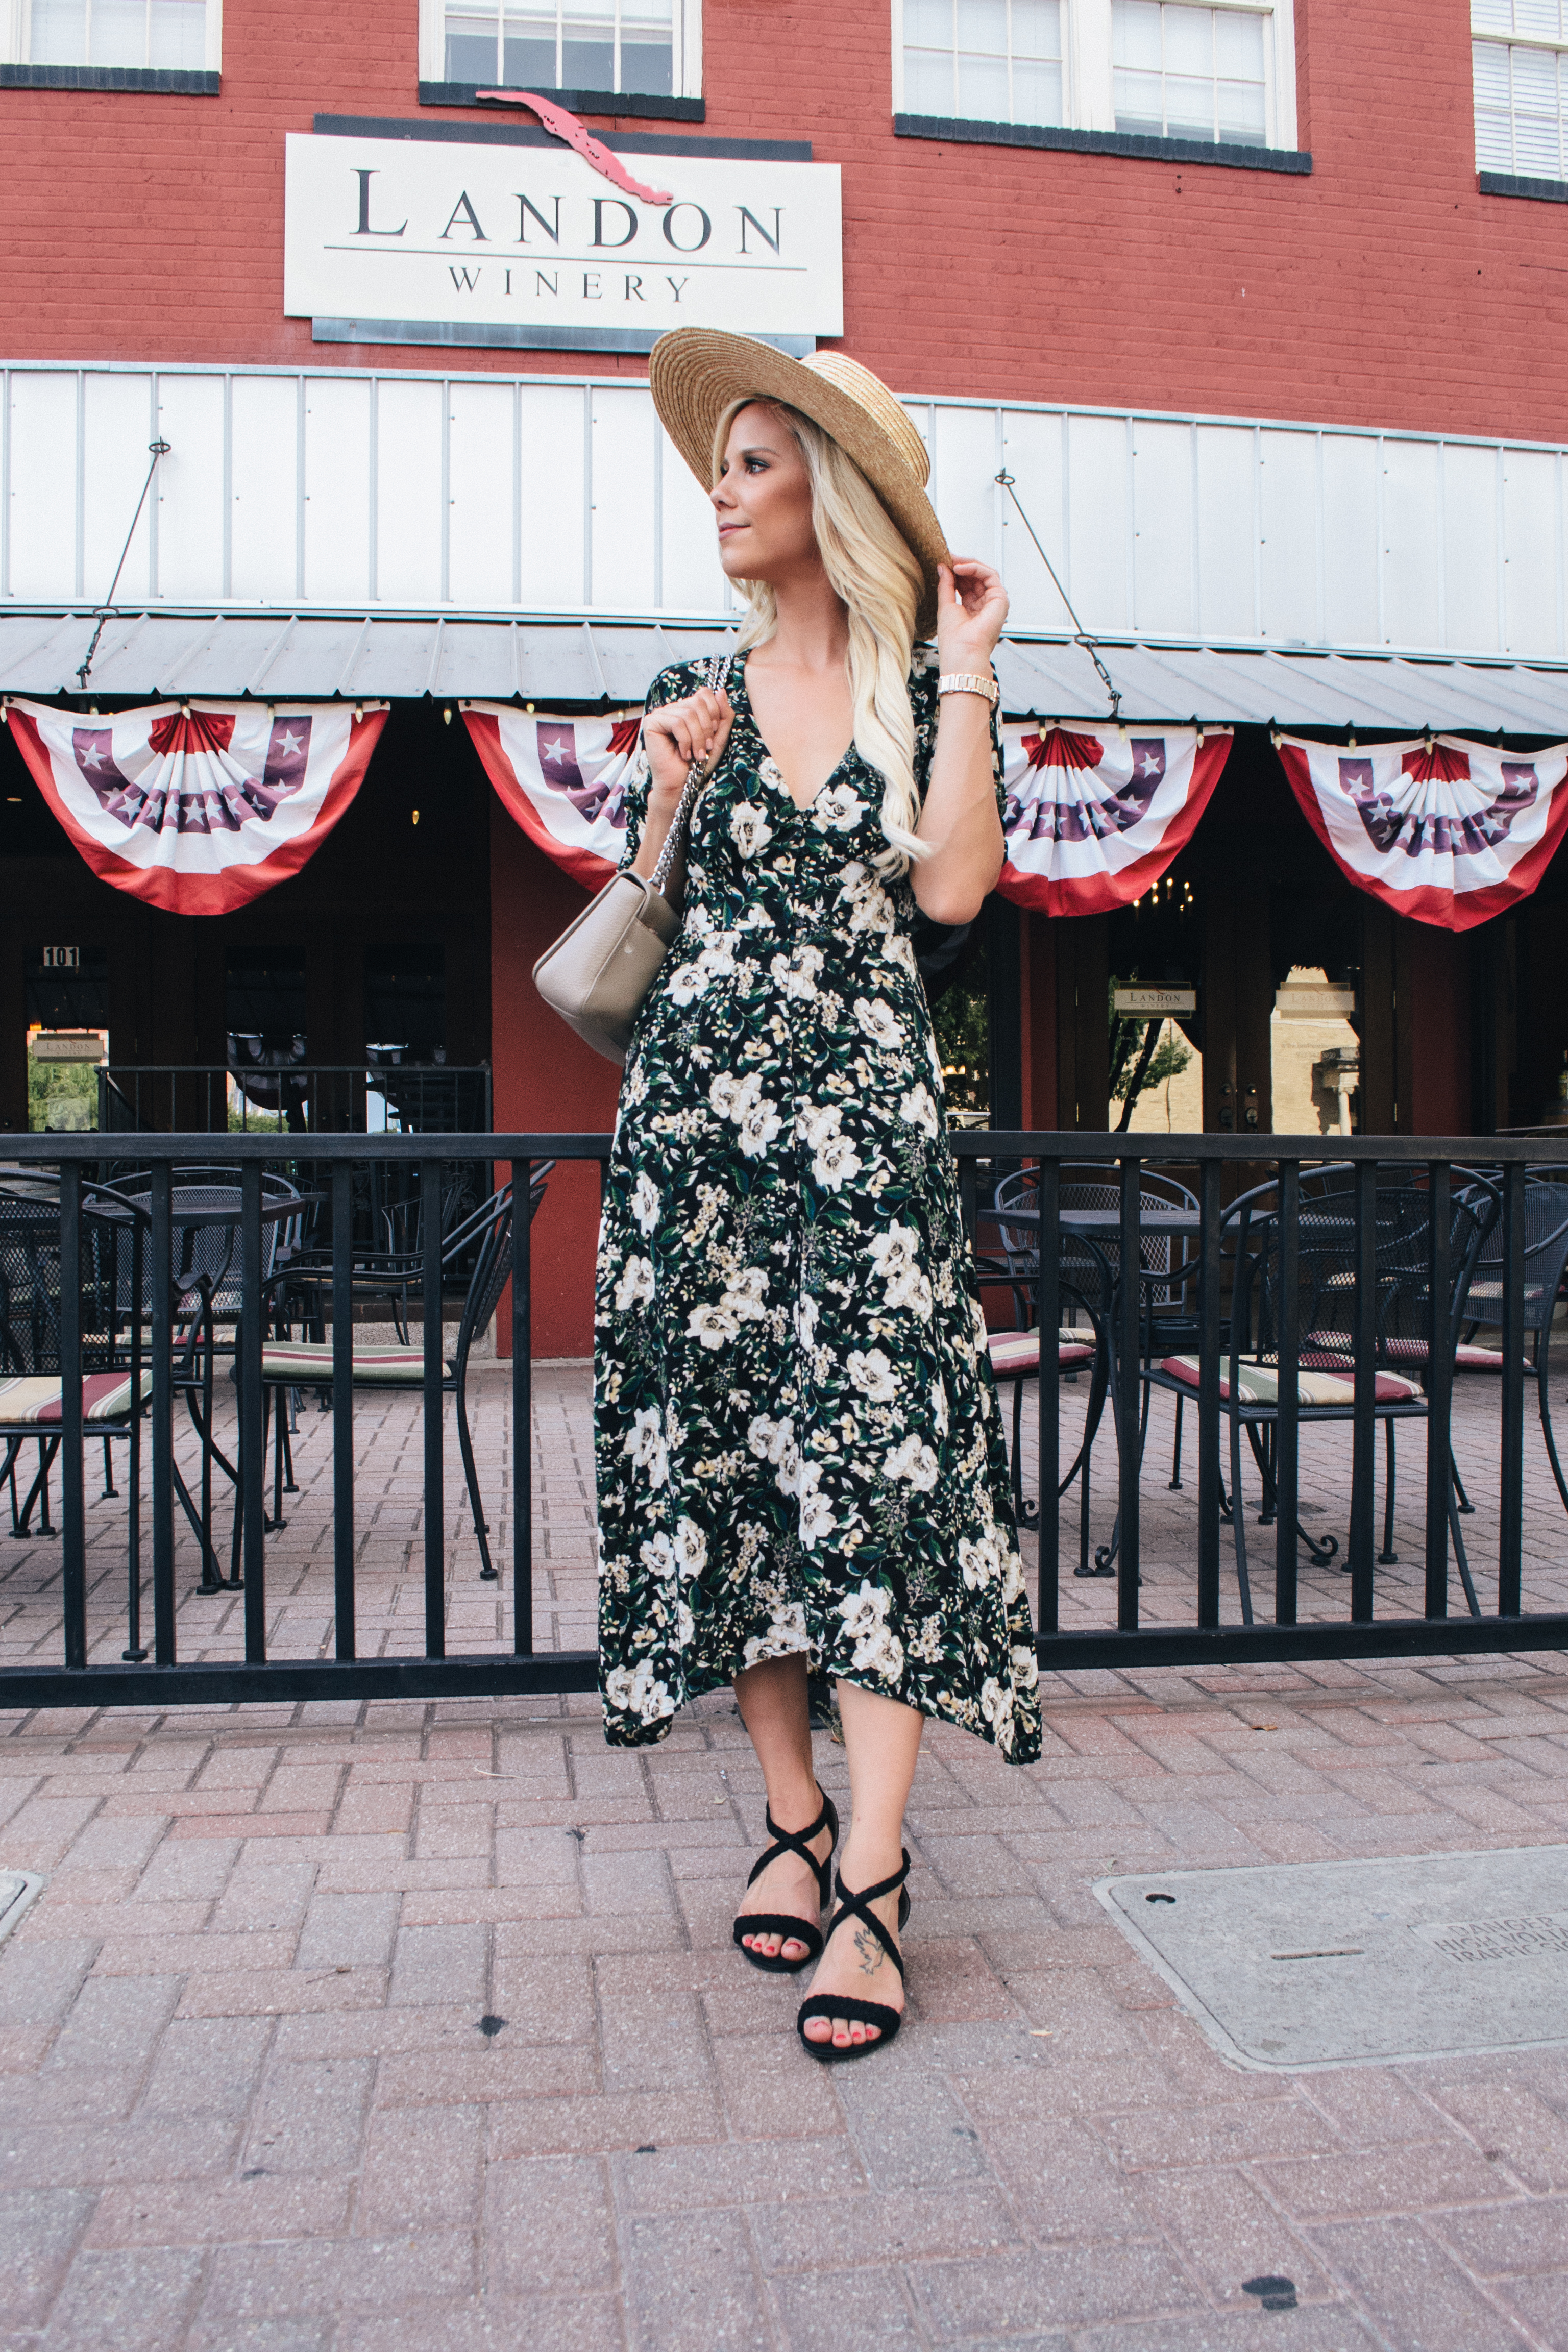 Start getting your wardrobe ready for the fall season with this fall transition outfit. This ASTR dress is ideal for layering in the upcoming fall season. See how Hannah McDonnell of Glam Life Living styled this look on the blog!